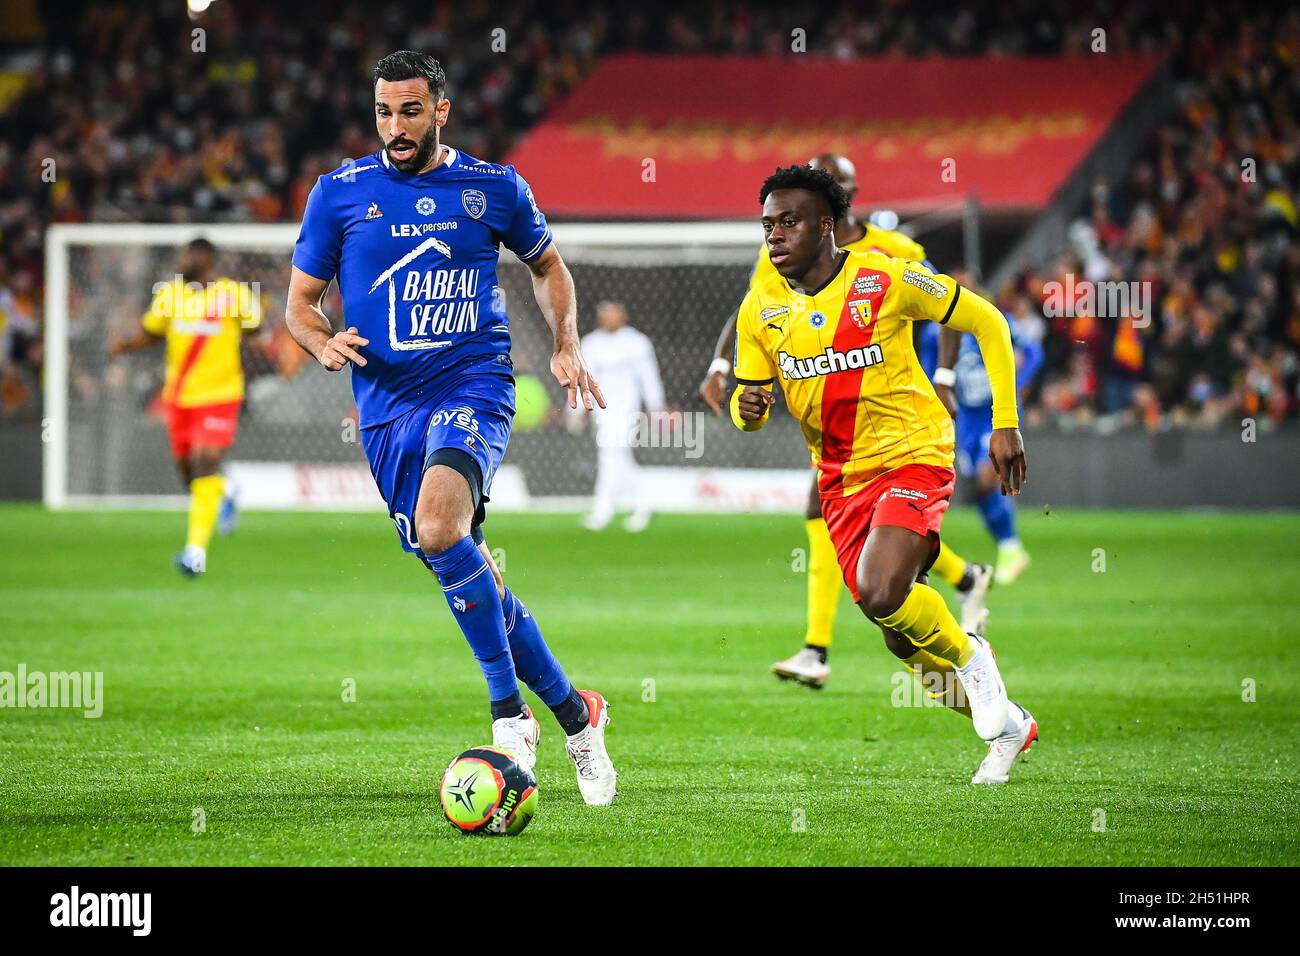 Lens, France. 05th Nov, 2021. Adil RAMI of ESTAC Troyes and Arnaud KALIMUENDO of Lens during the French championship Ligue 1 football match between RC Lens and ESTAC Troyes on November 5, 2021 at Bollaert-Delelis stadium in Lens, France - Photo: Matthieu Mirville/DPPI/LiveMedia Credit: Independent Photo Agency/Alamy Live News Stock Photo